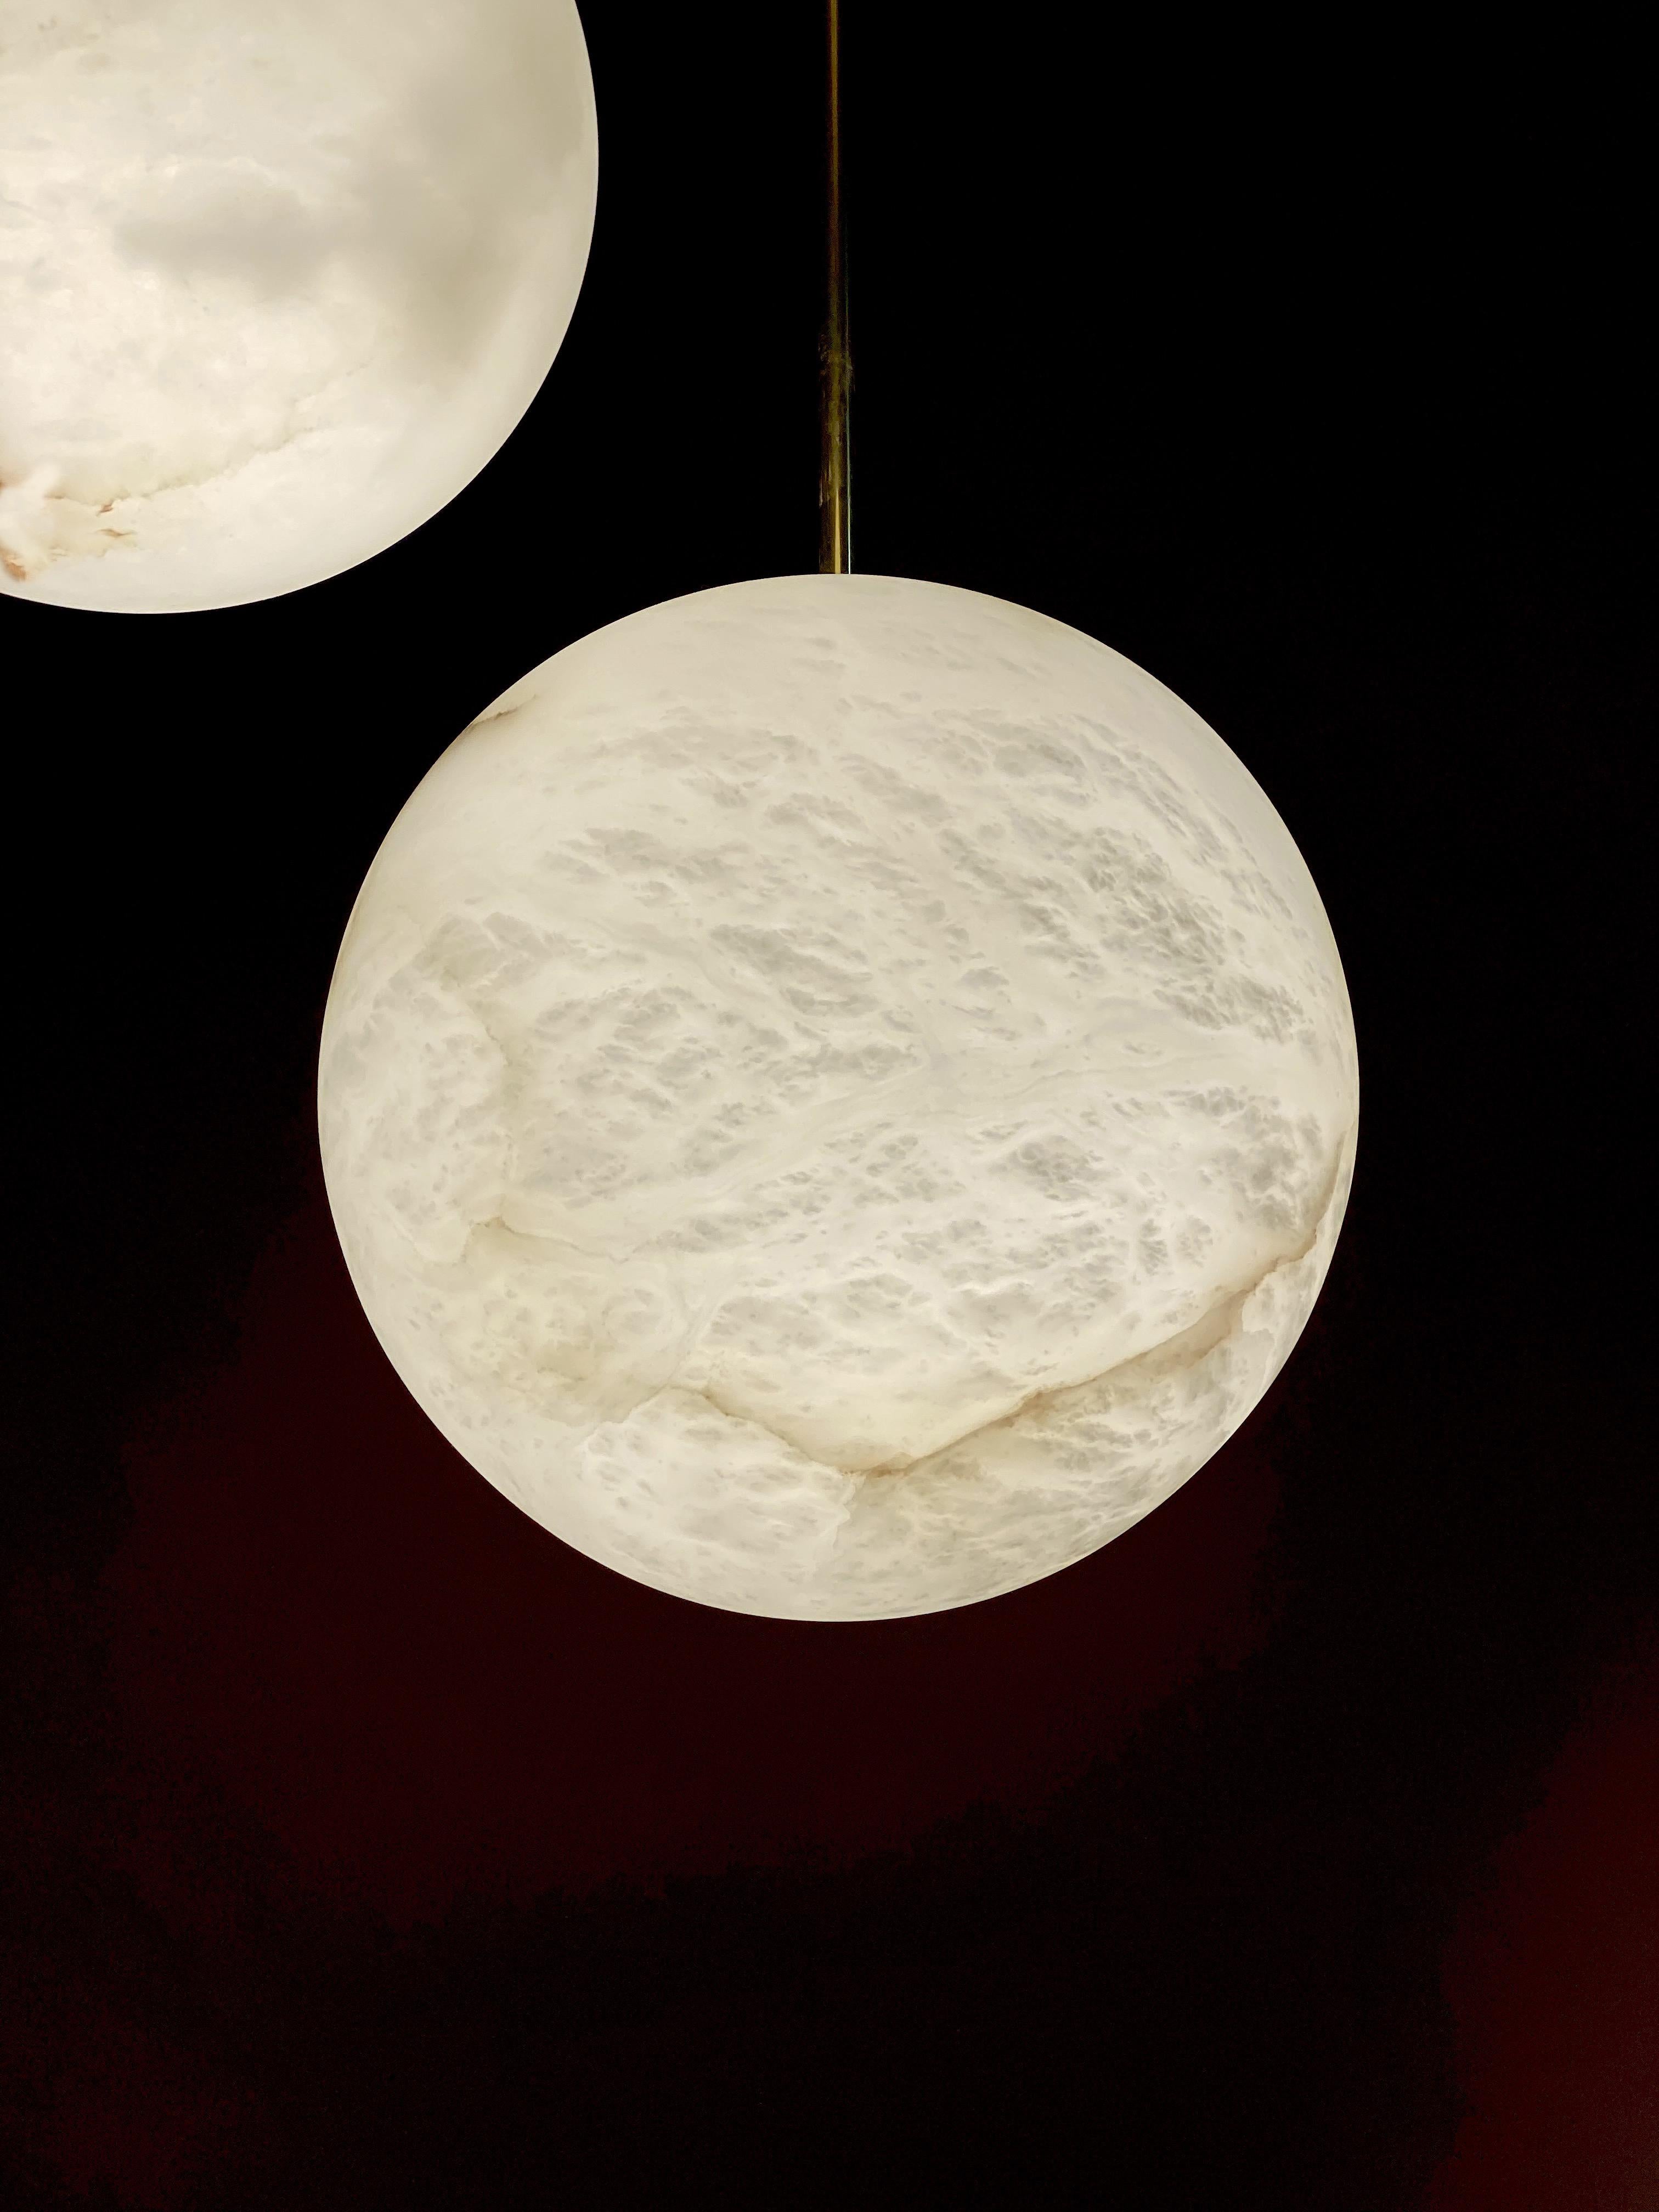 Galaxy contemporary Italian alabaster marble globe chandelier.
Exclusive production of Tuscany alabaster, handmade with great skill of Italian craftsmanship.